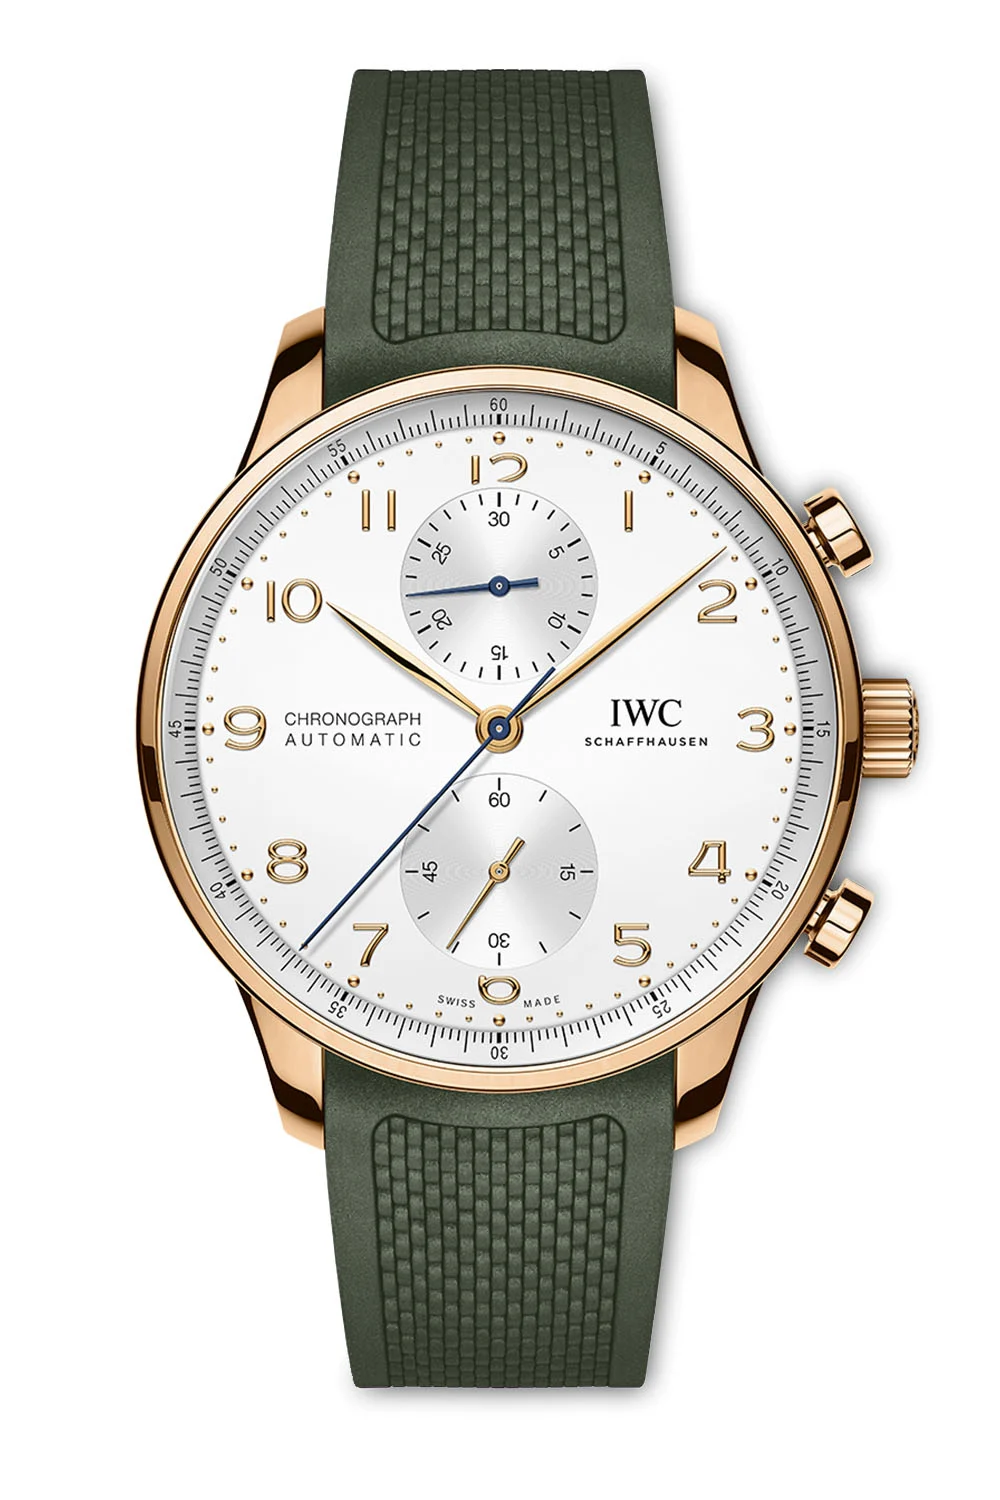 Introducing The New Colourful Rubber Straps For The Classic UK AAA Replica IWC Portugieser Chronograph 3716